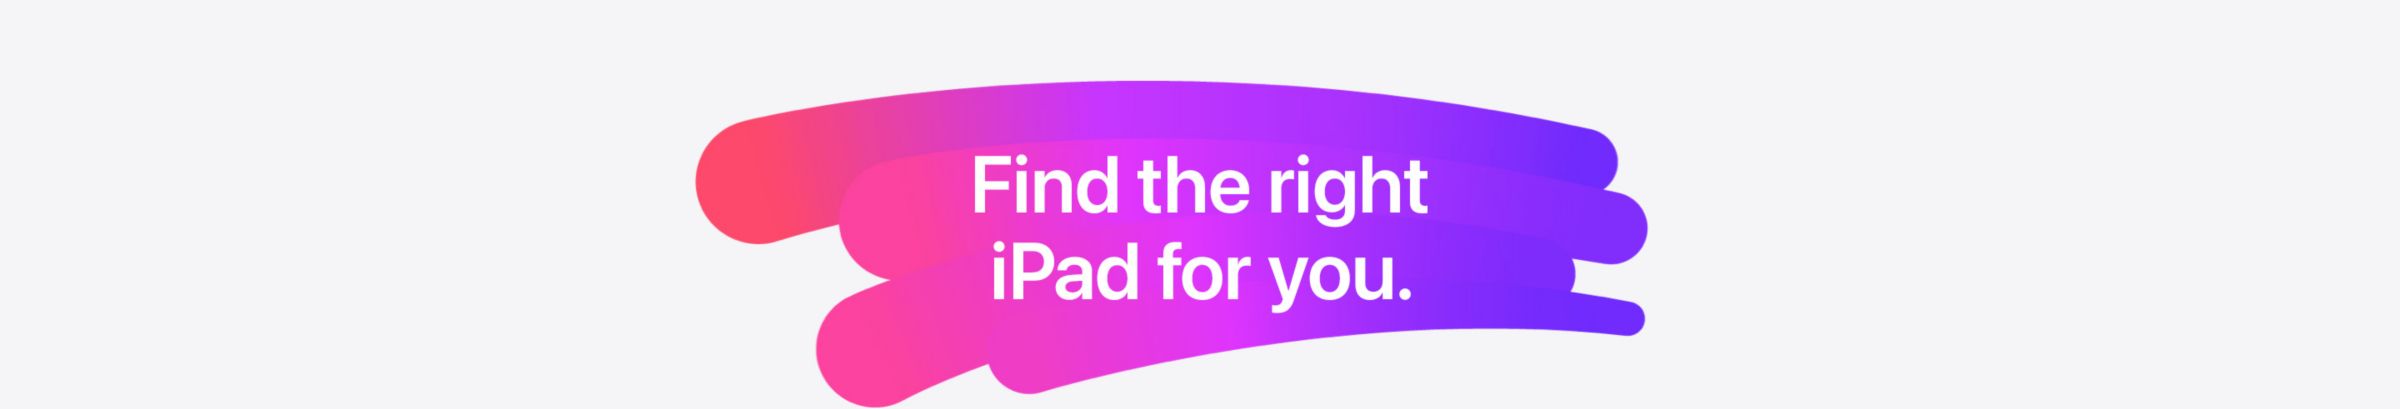 Apple Do More on iPad Find the right Ipad